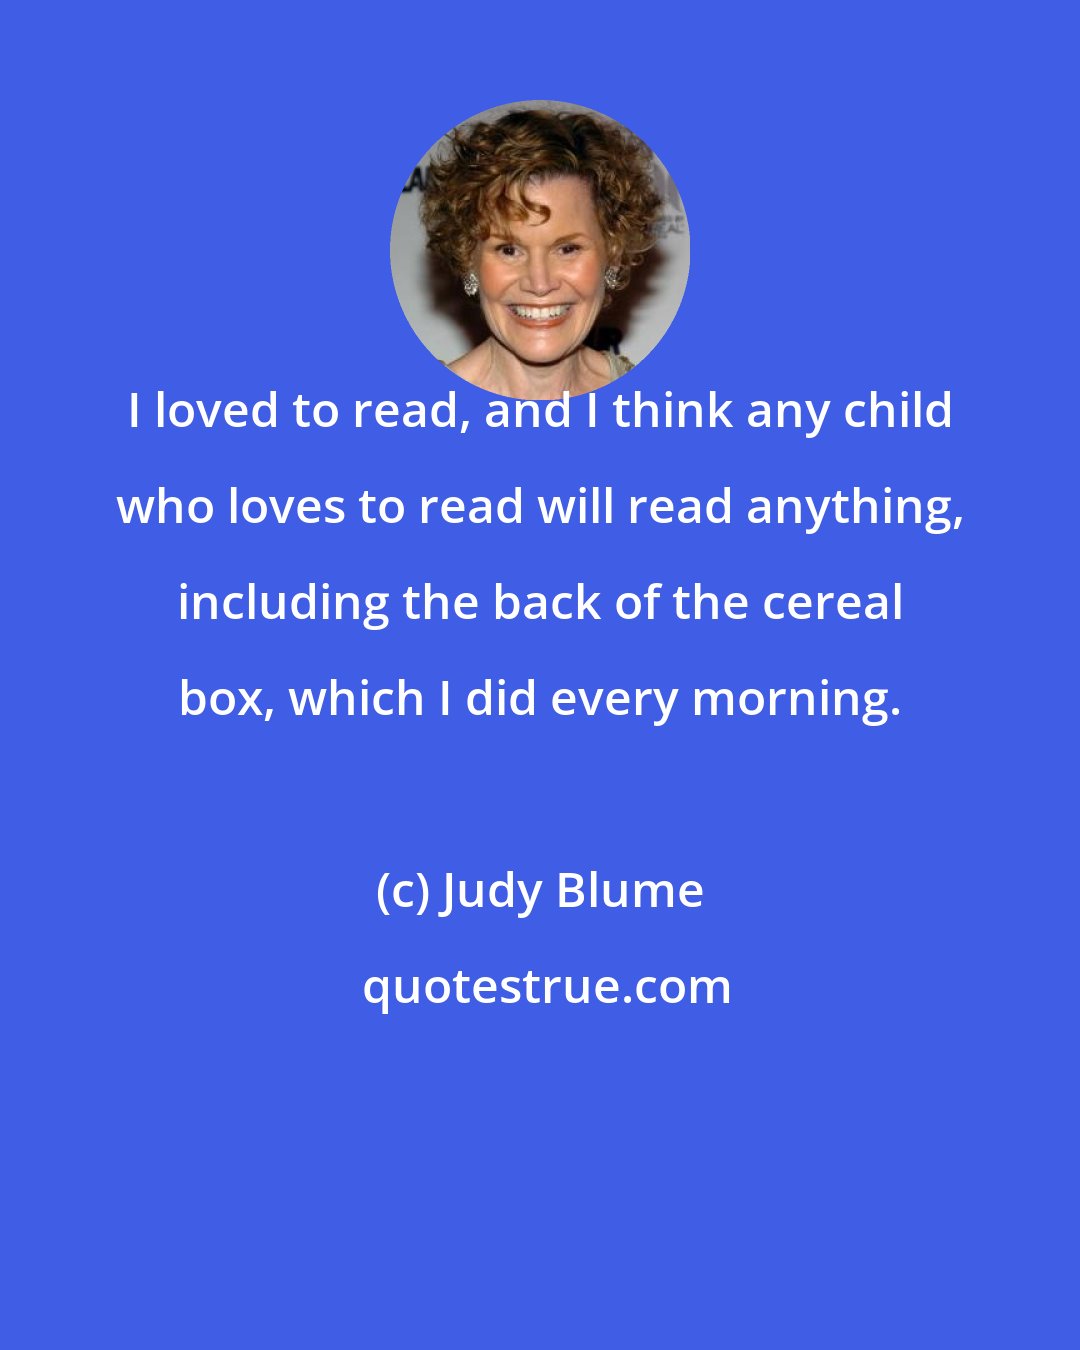 Judy Blume: I loved to read, and I think any child who loves to read will read anything, including the back of the cereal box, which I did every morning.